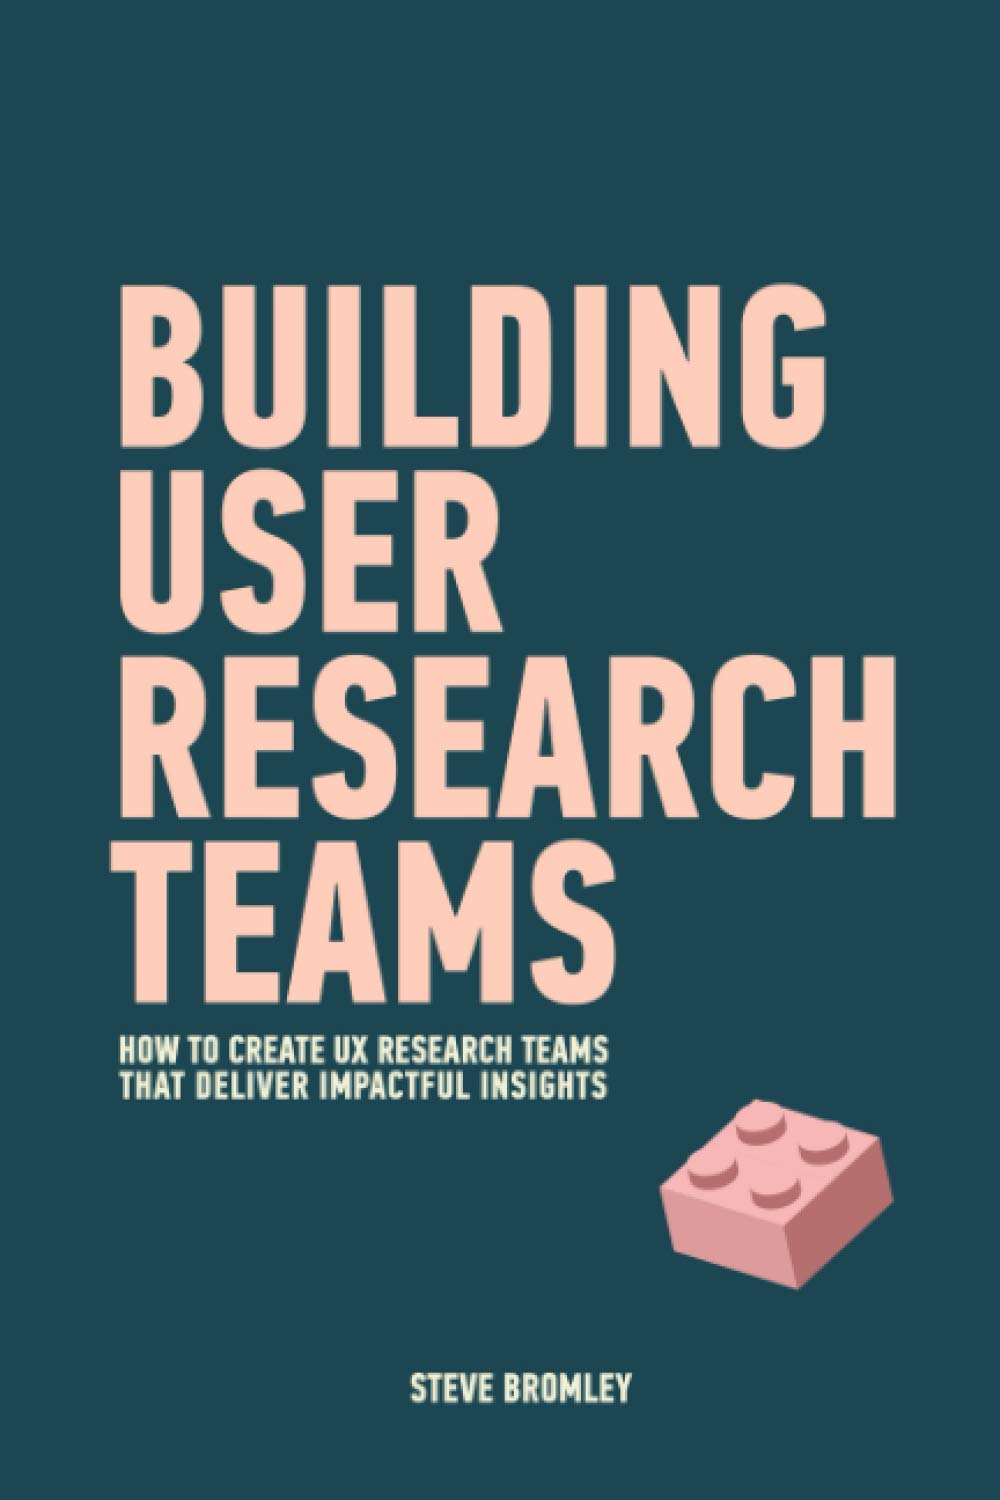 Image Building user research teams : how to create UX research teams that deliver impactful insights